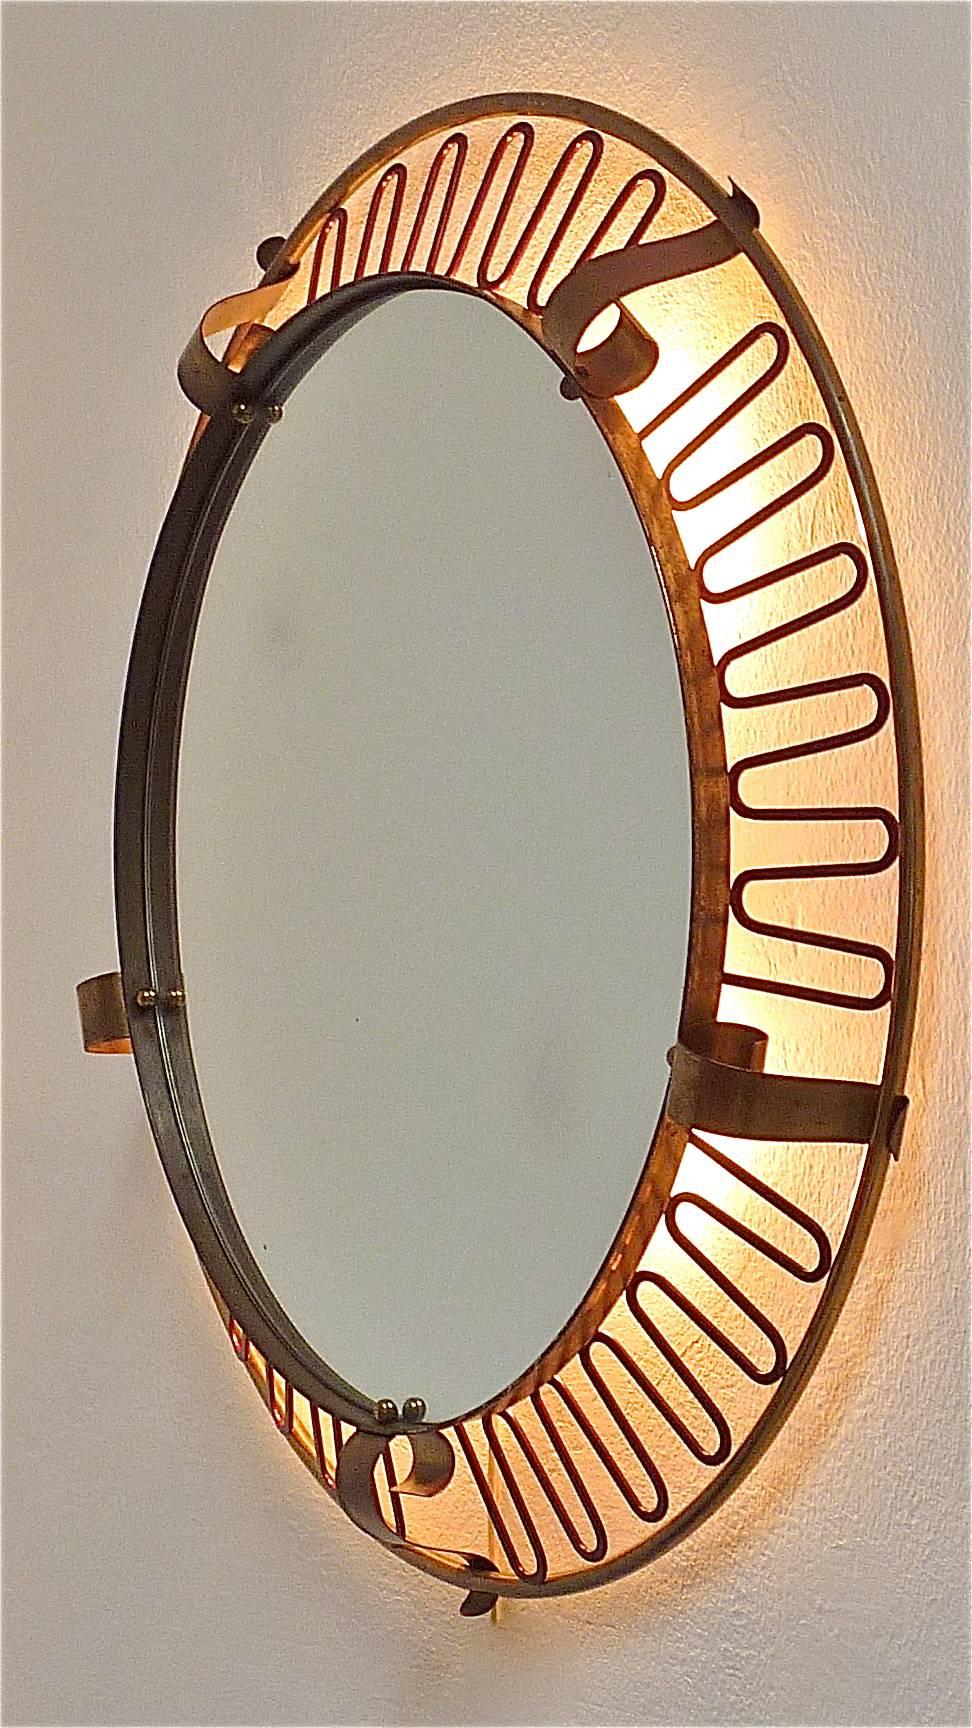 Jean Royère Style Illuminated Wall Mirror Patinated Brass Red Enameled 2